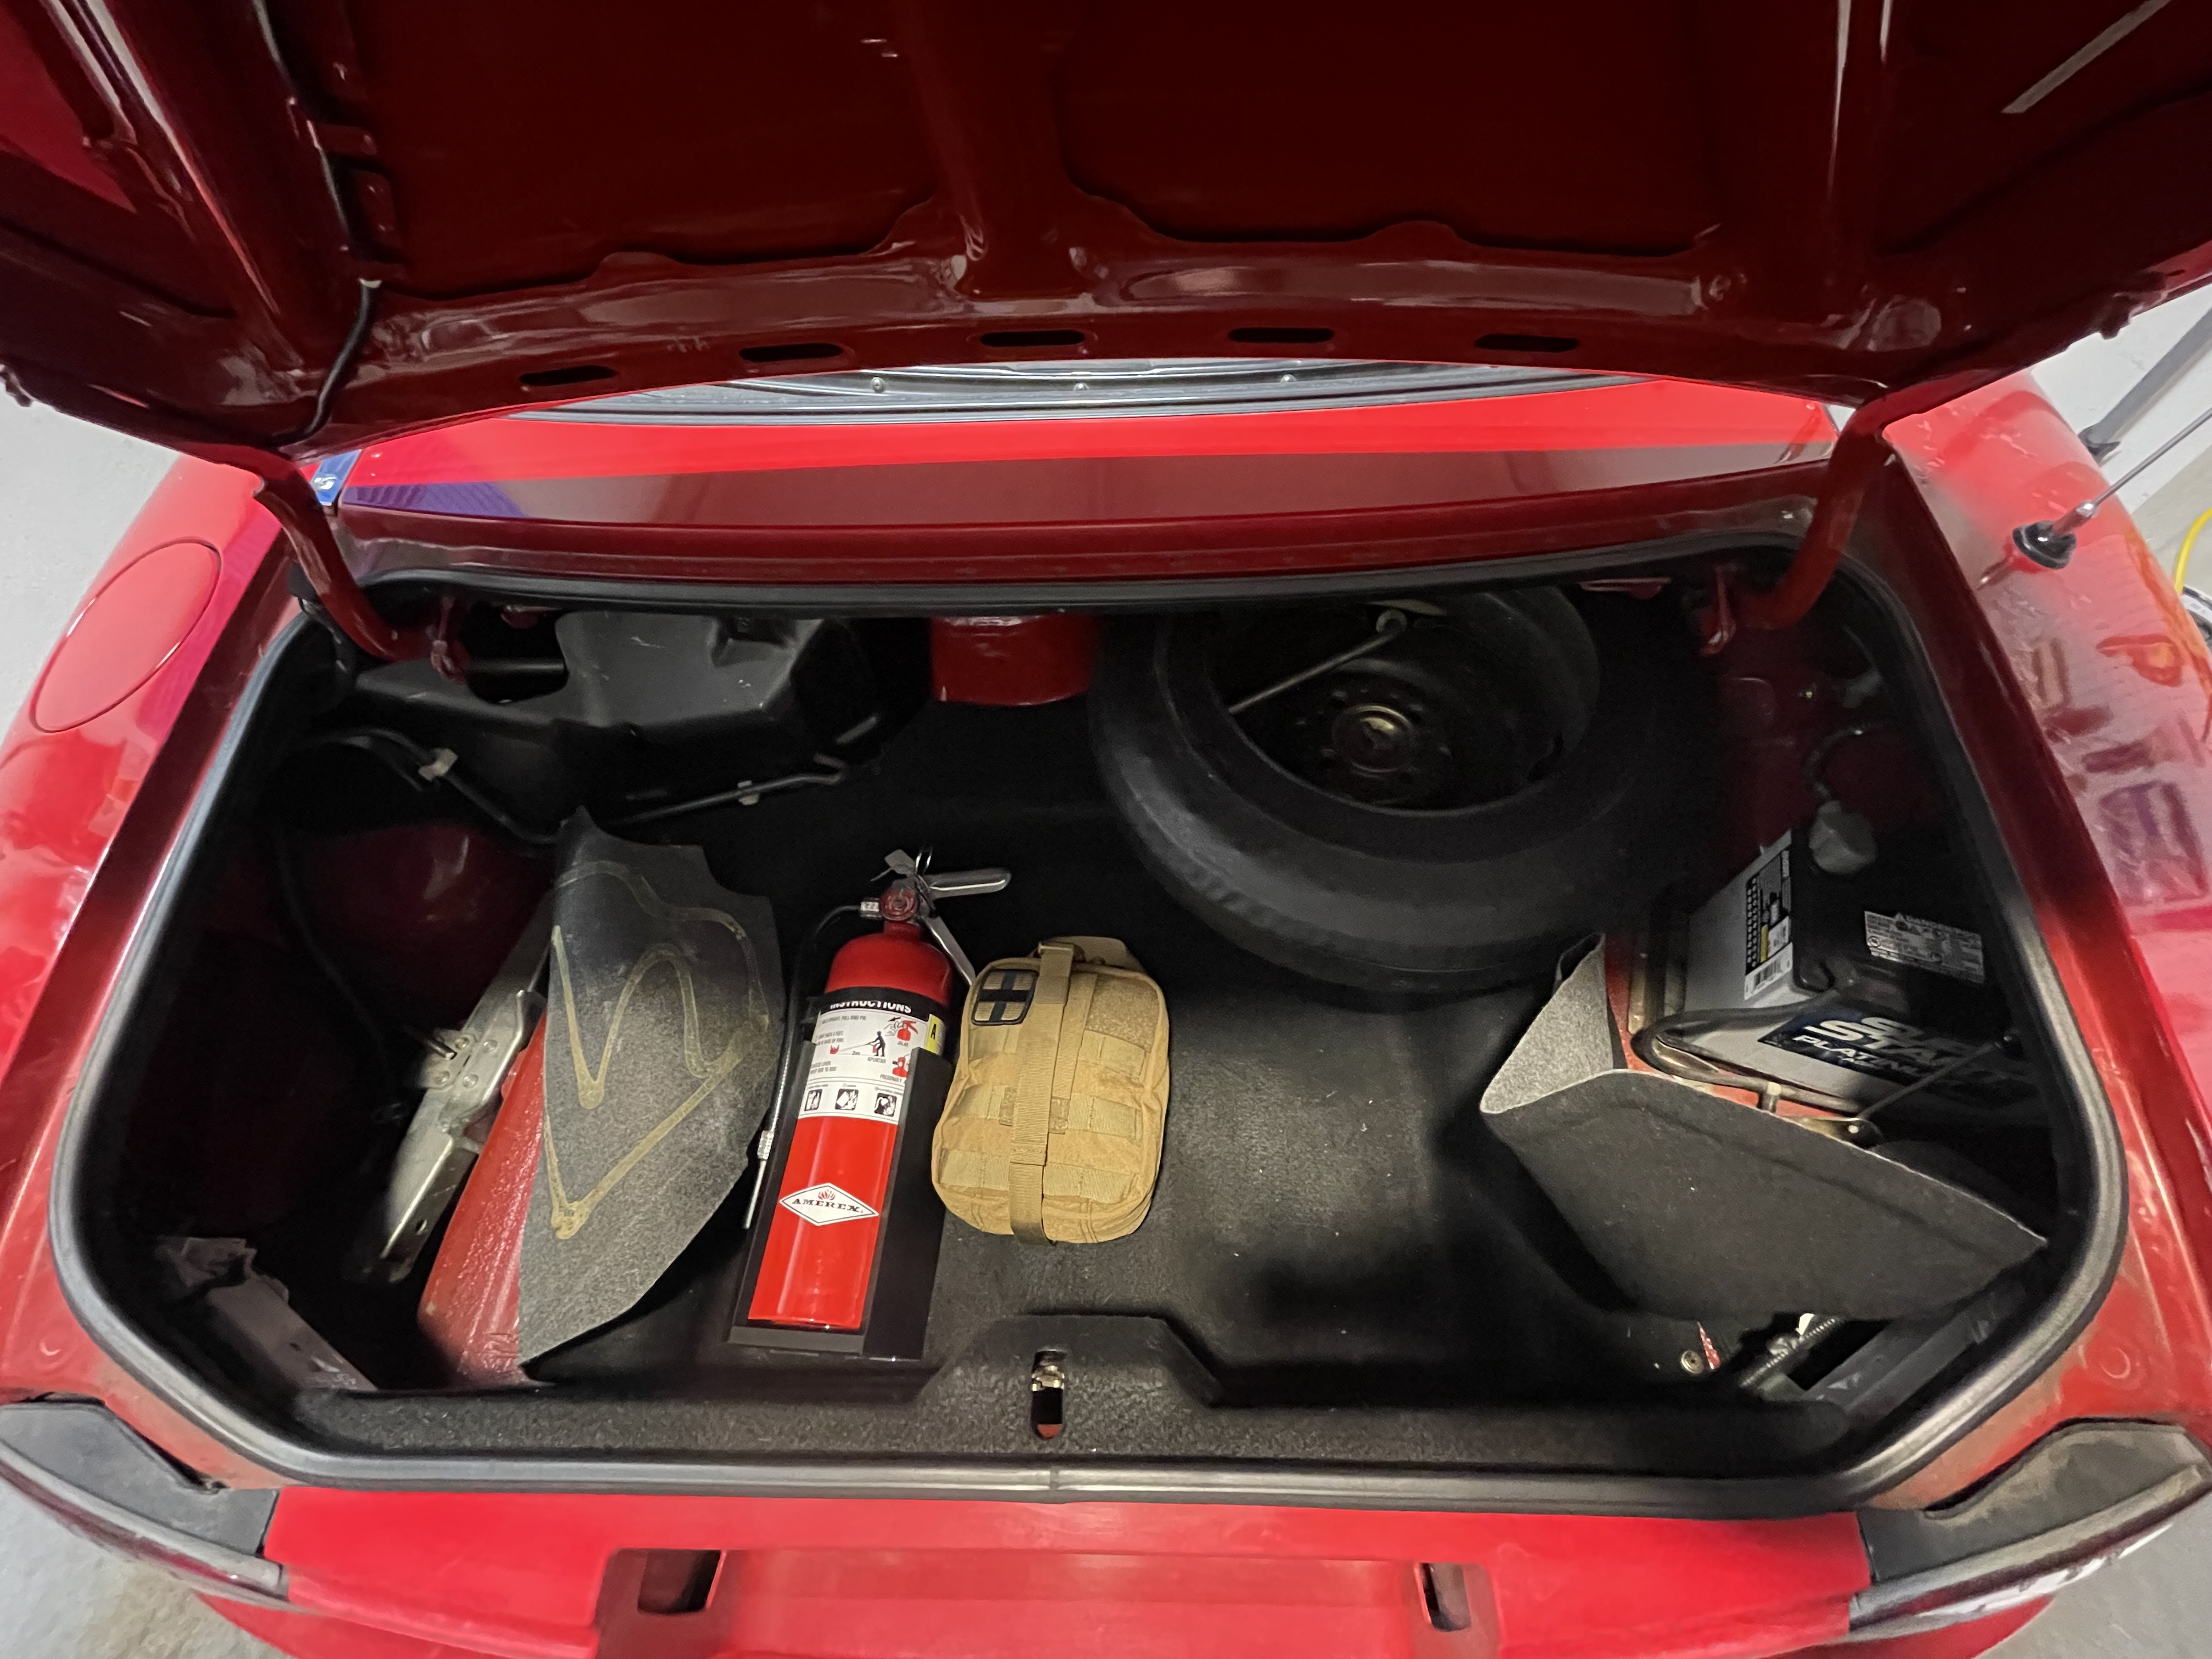 The trunk with the battery and jack revealed